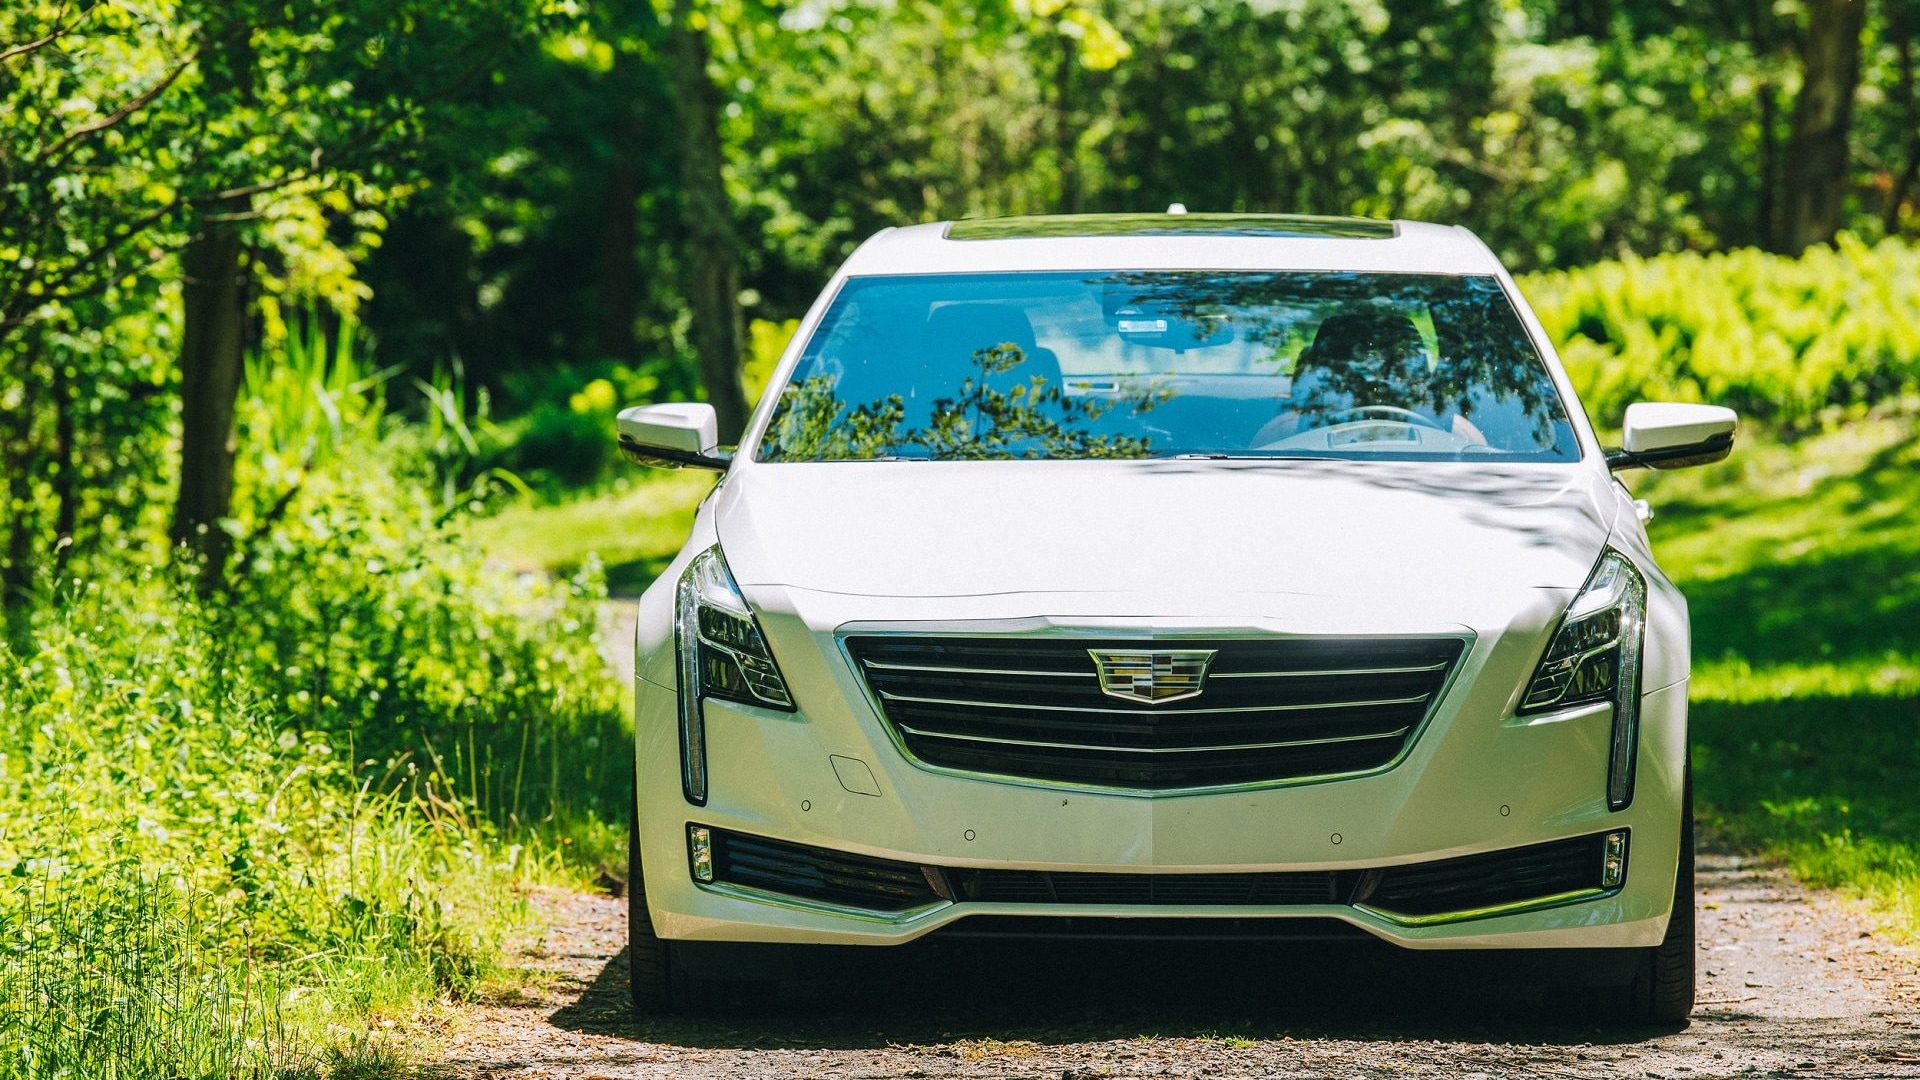 2017 Cadillac CT6 plug-in hybrid, New York City and Westchester County, NY, May 2017